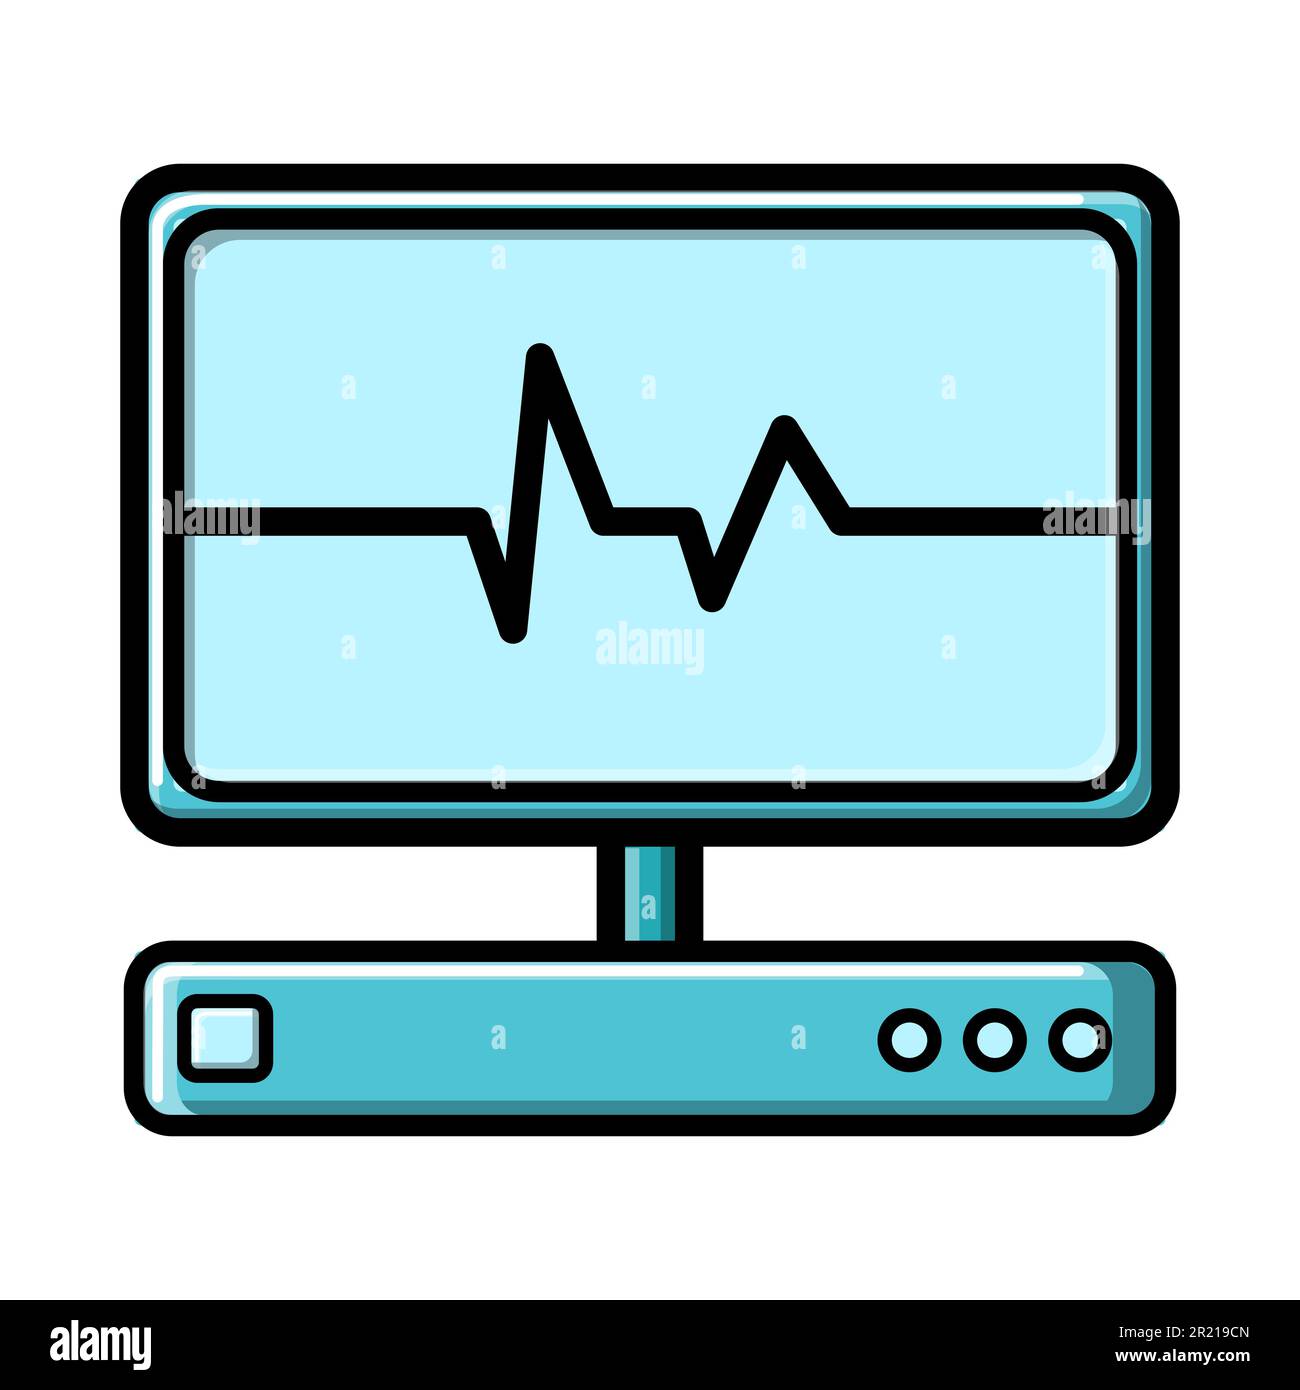 Abstract medical device with a monitor for examination of the heart, ultrasound and cardiogram,  icon on a white background. Vector illustration. Stock Vector